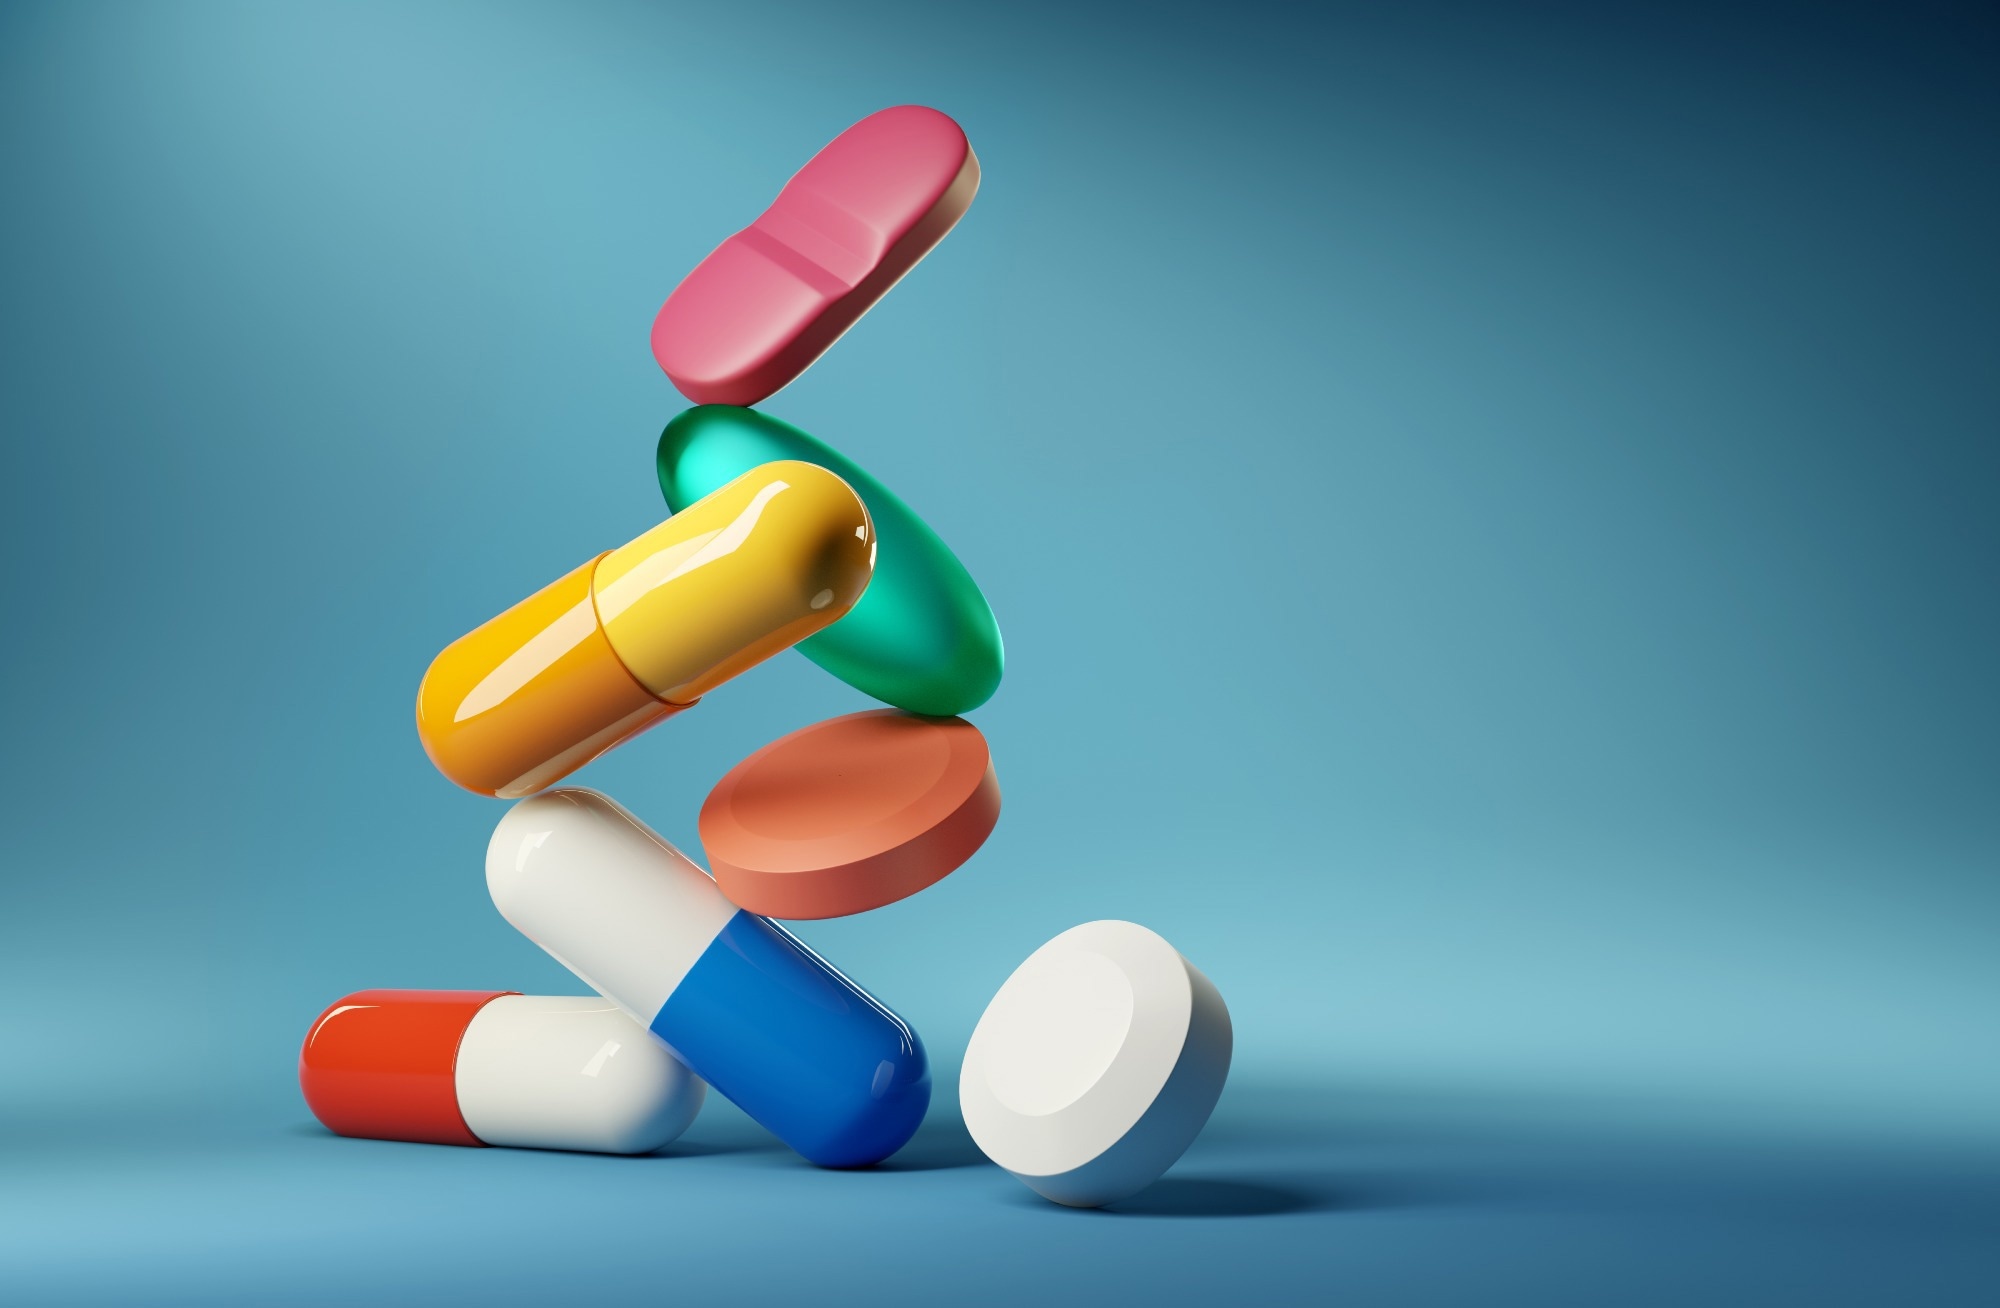 Research Letter: Antibiotic Receipt During Outpatient Visits for COVID-19 in the US, From 2020 to 2022. Image Credit: solarseven / Shutterstock